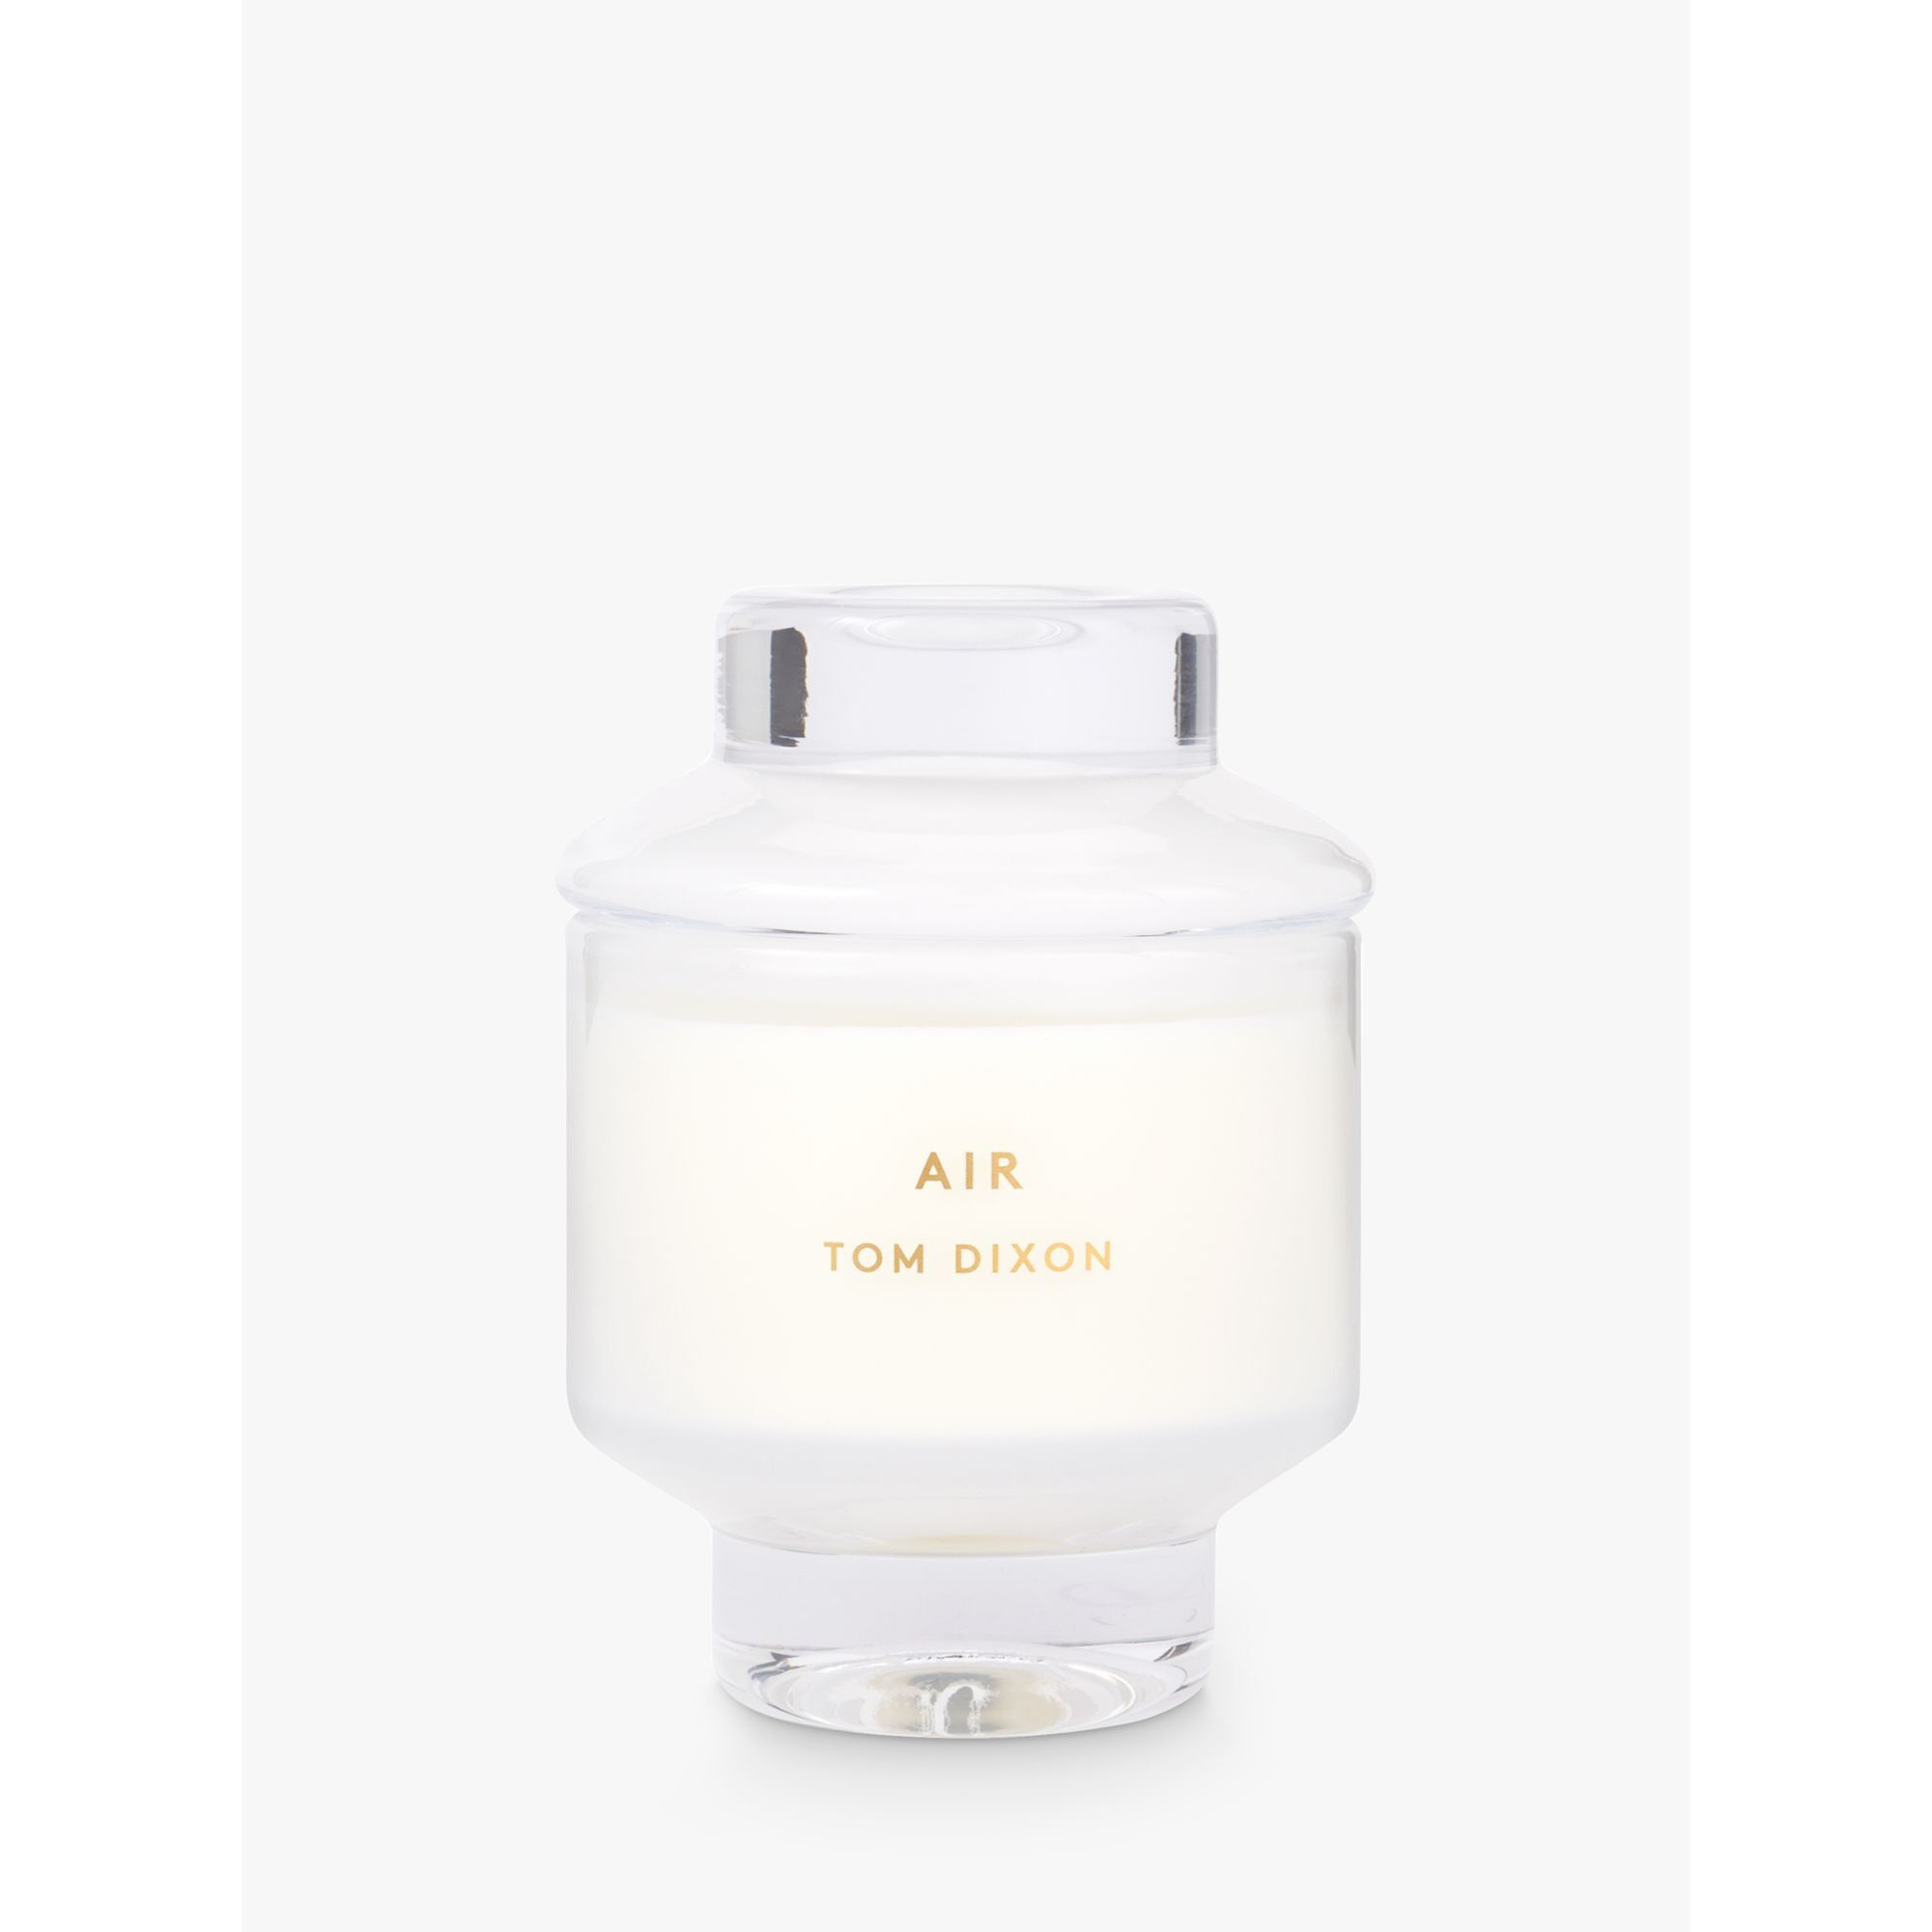 Tom Dixon Air Scented Candle, 280g - image 1